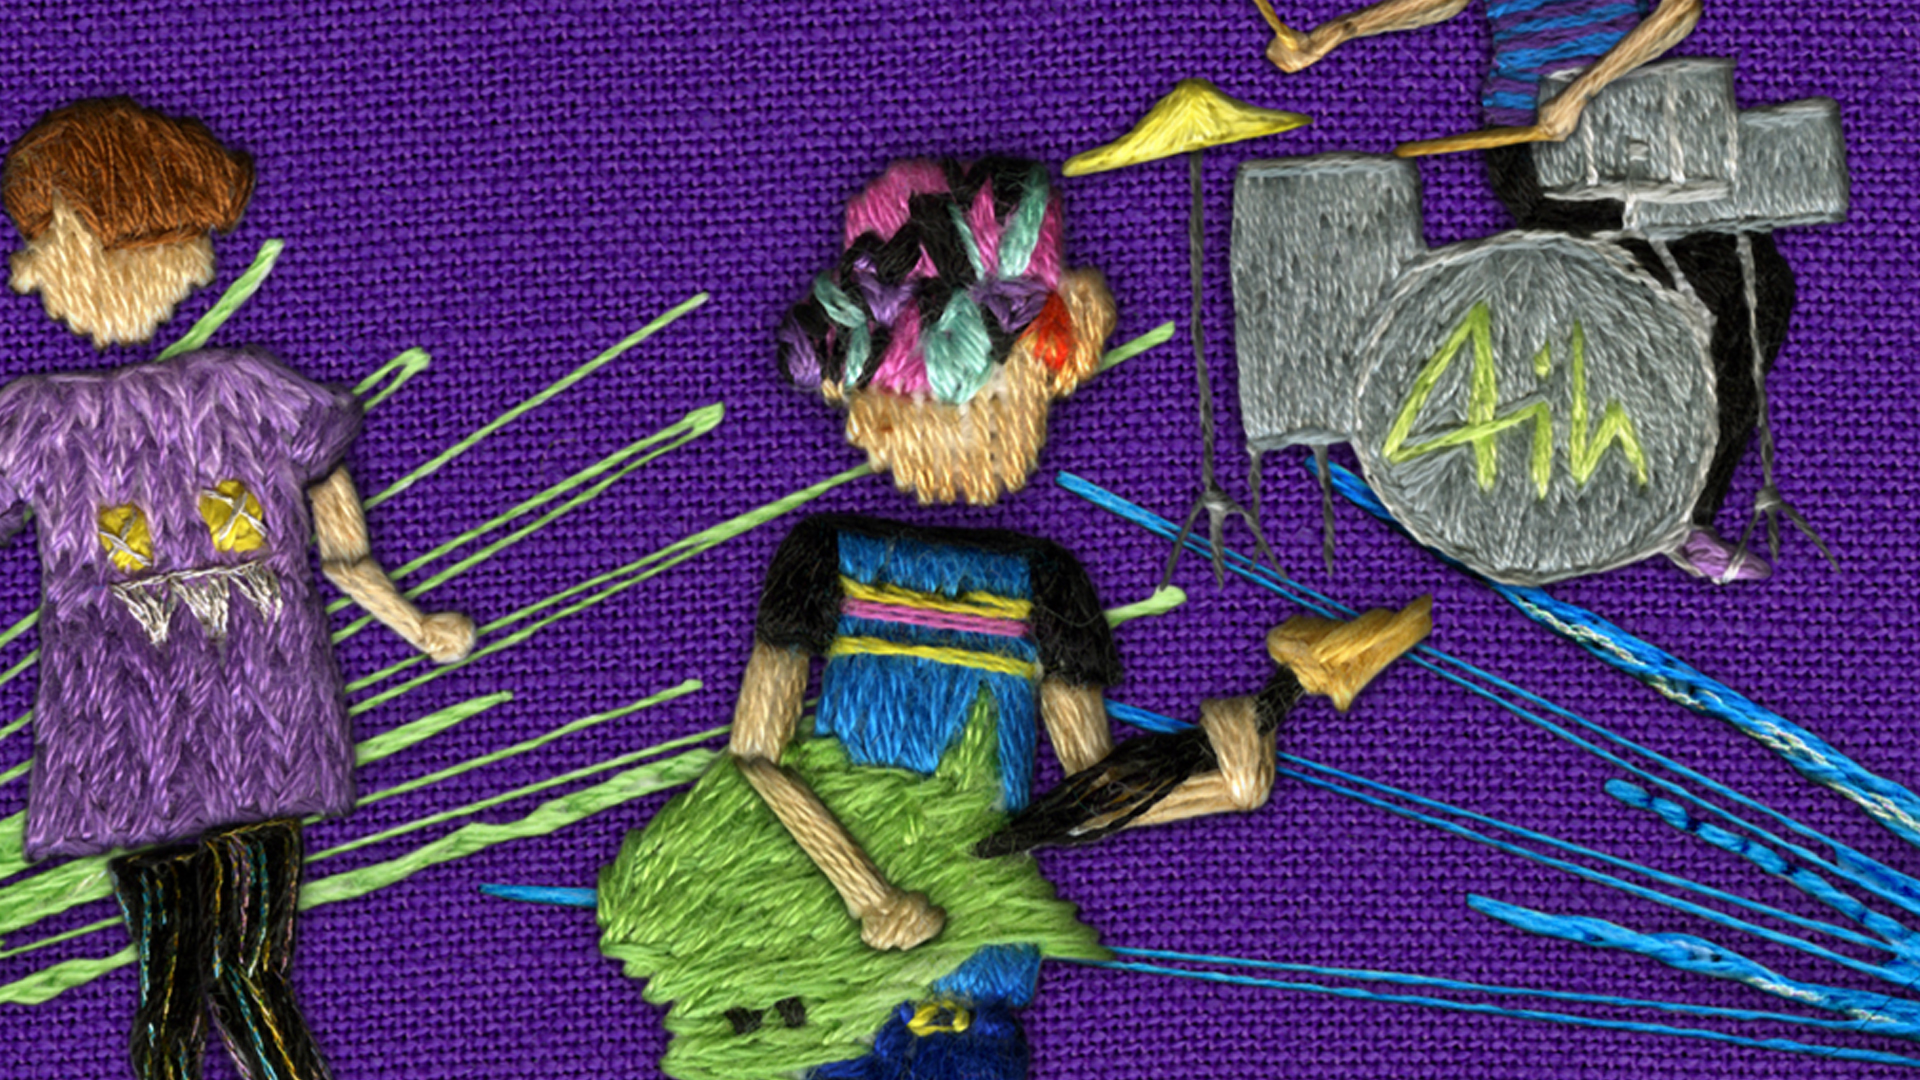 An embroidered person playing a lime green guitar on a purple background. 